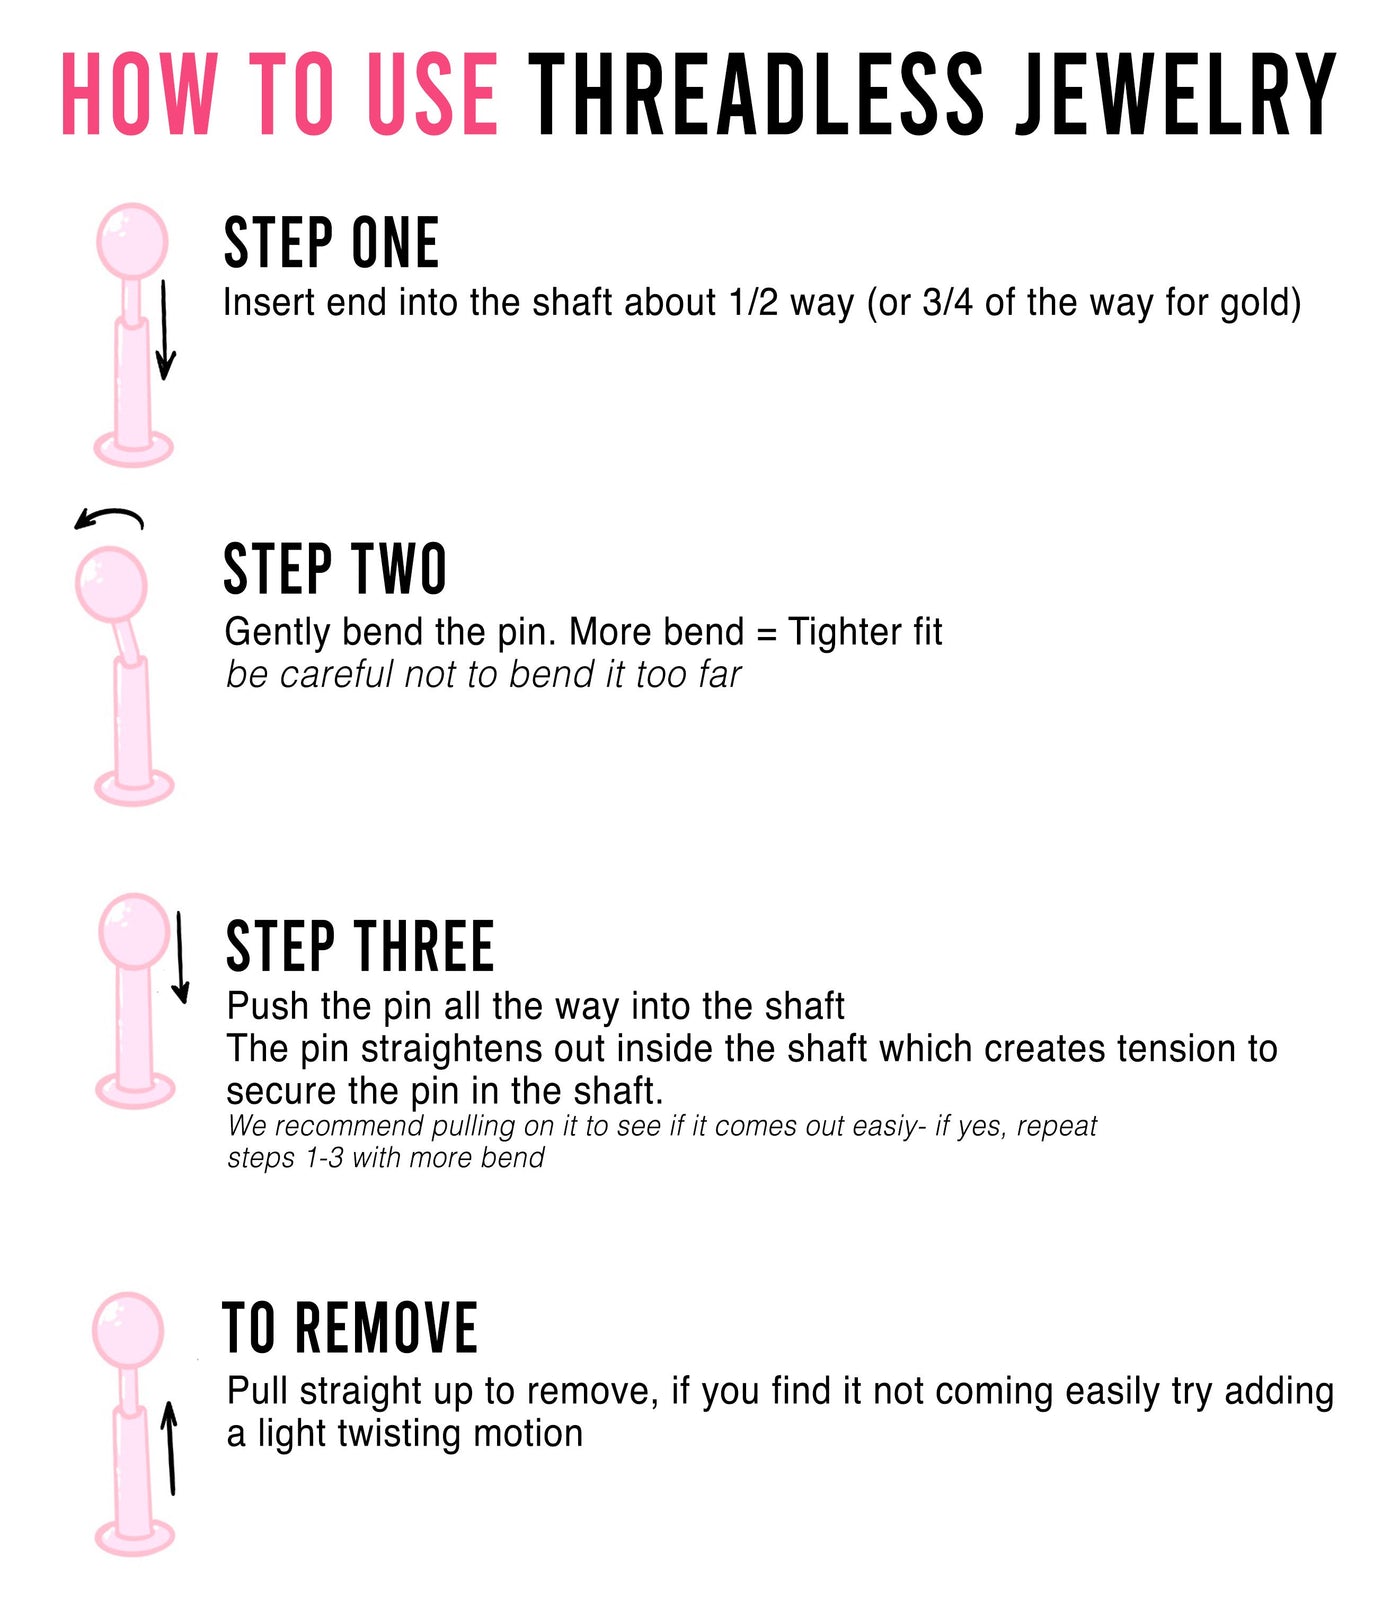 how to threadless jewelry change body piercings by myself